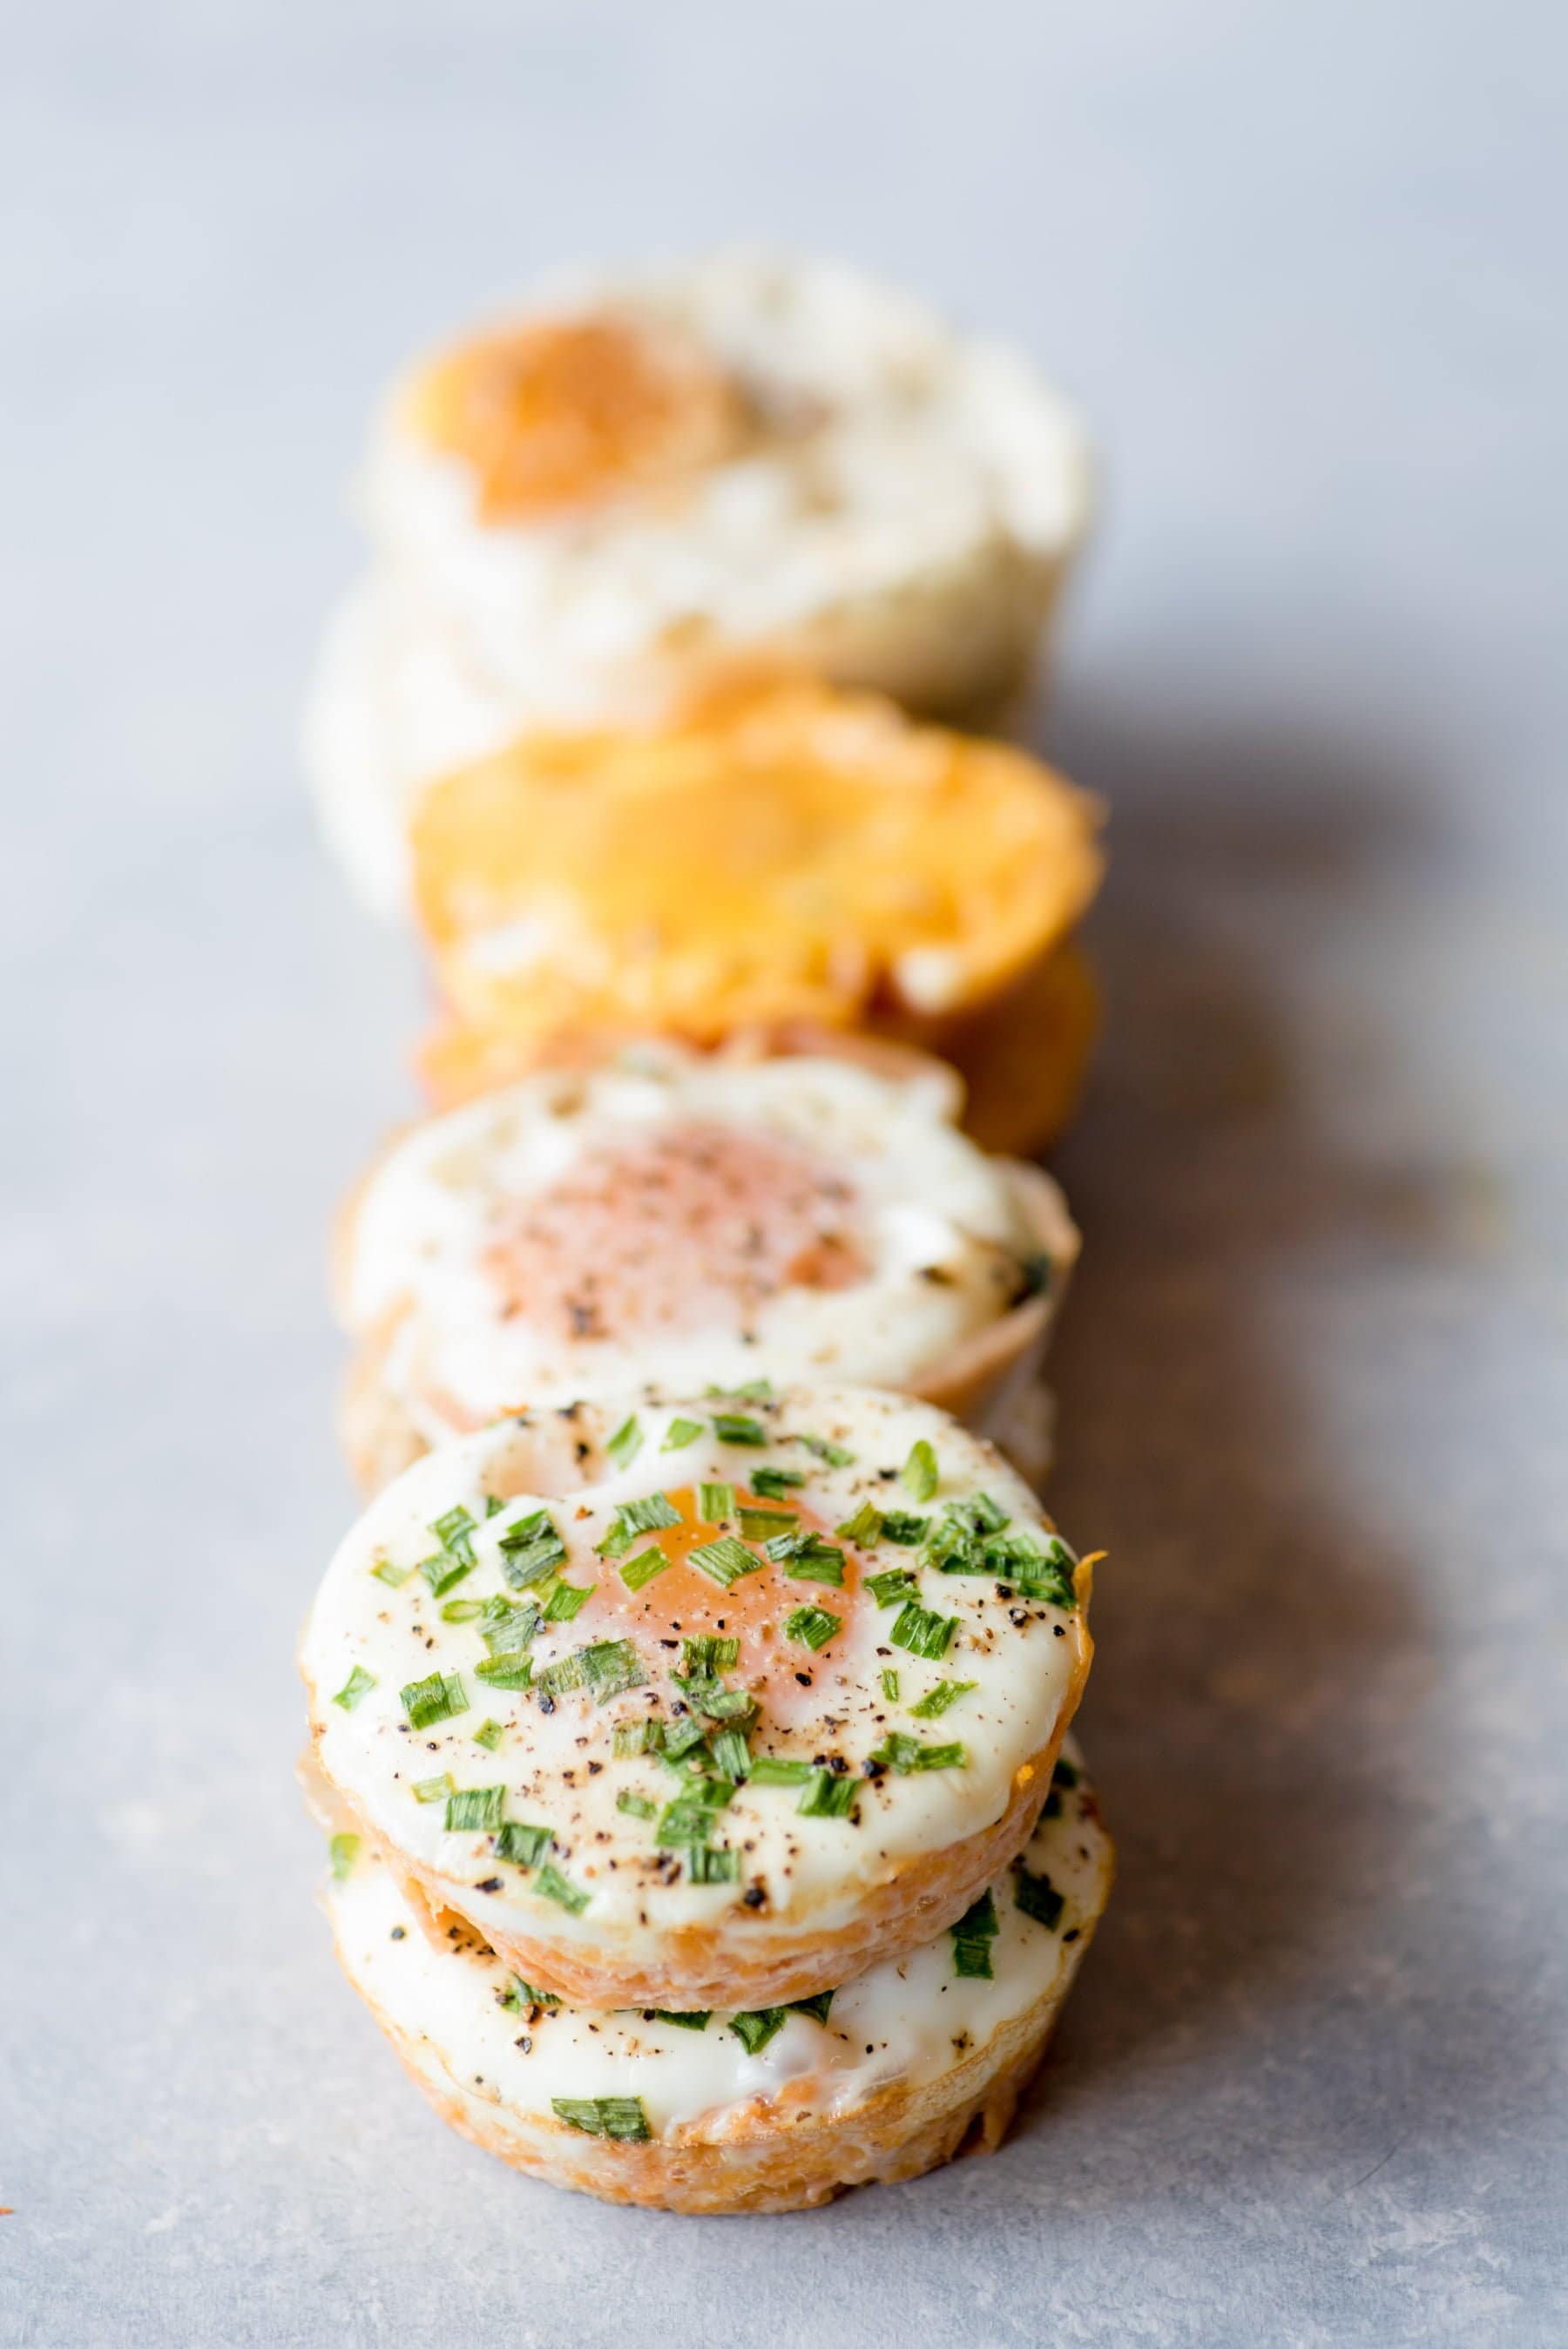 Four stacks of egg muffin cups rest on a grey background. The front stack is topped with chopped herbs.